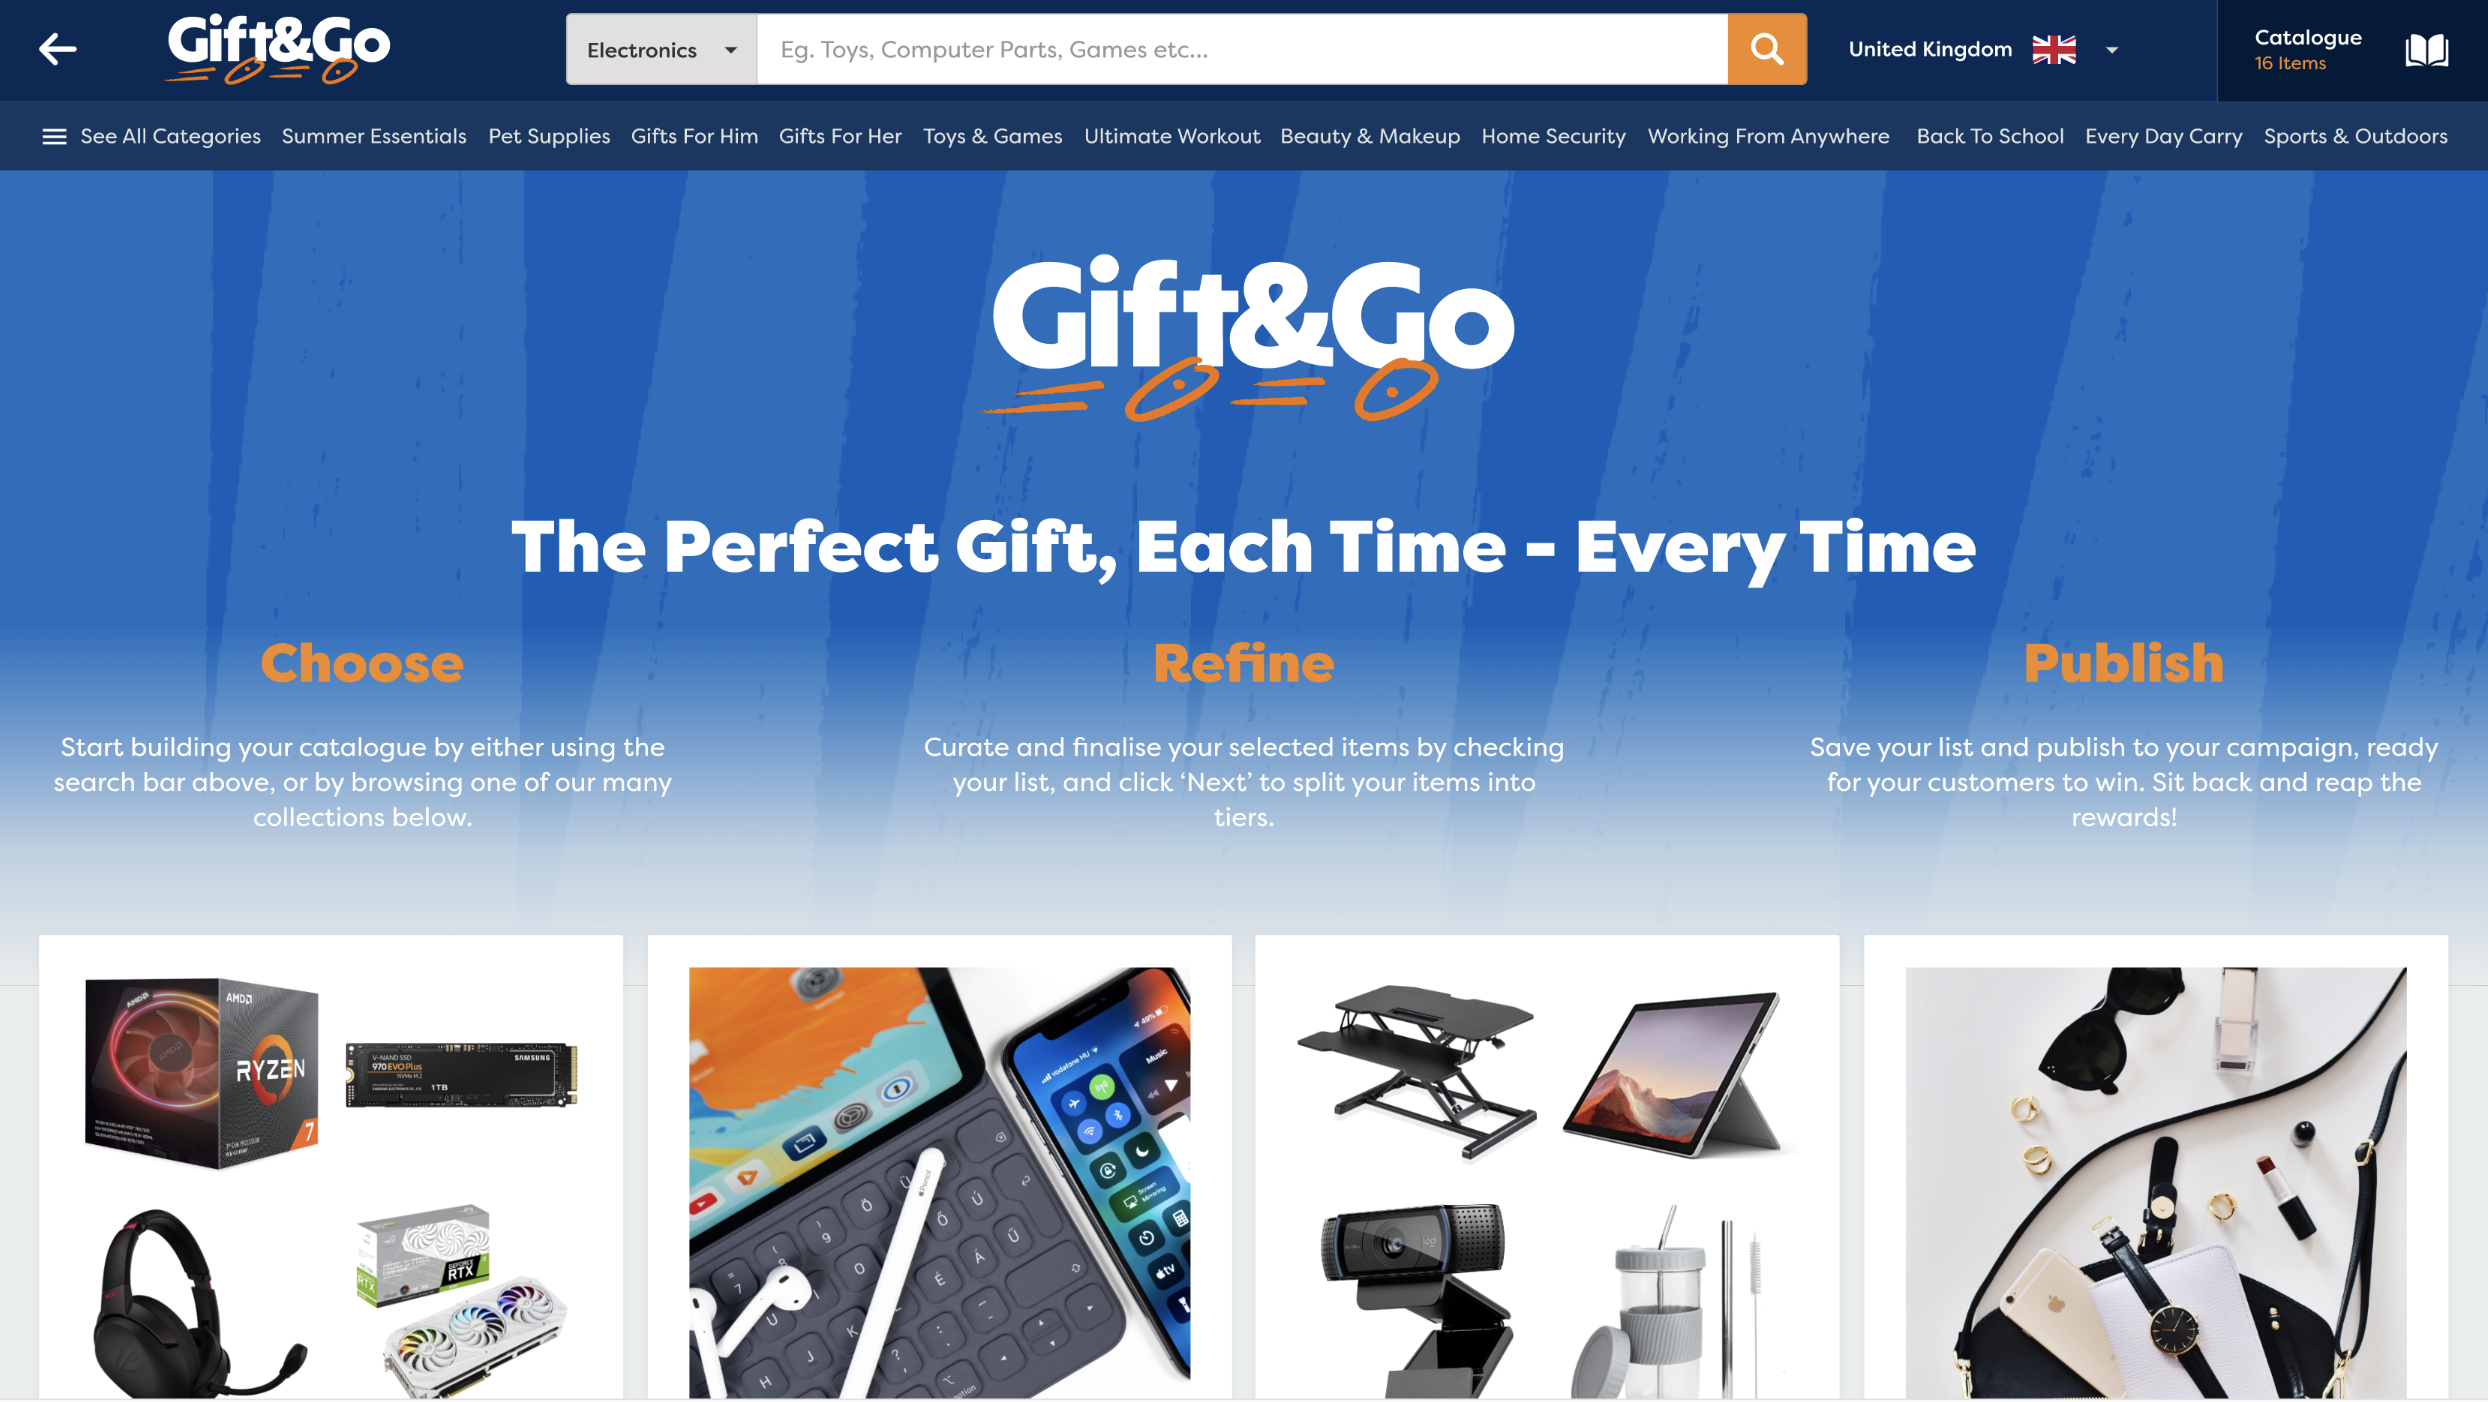 Gift & Go f1130b8d-751c-454b-81e1-a8aeeedf23be.png